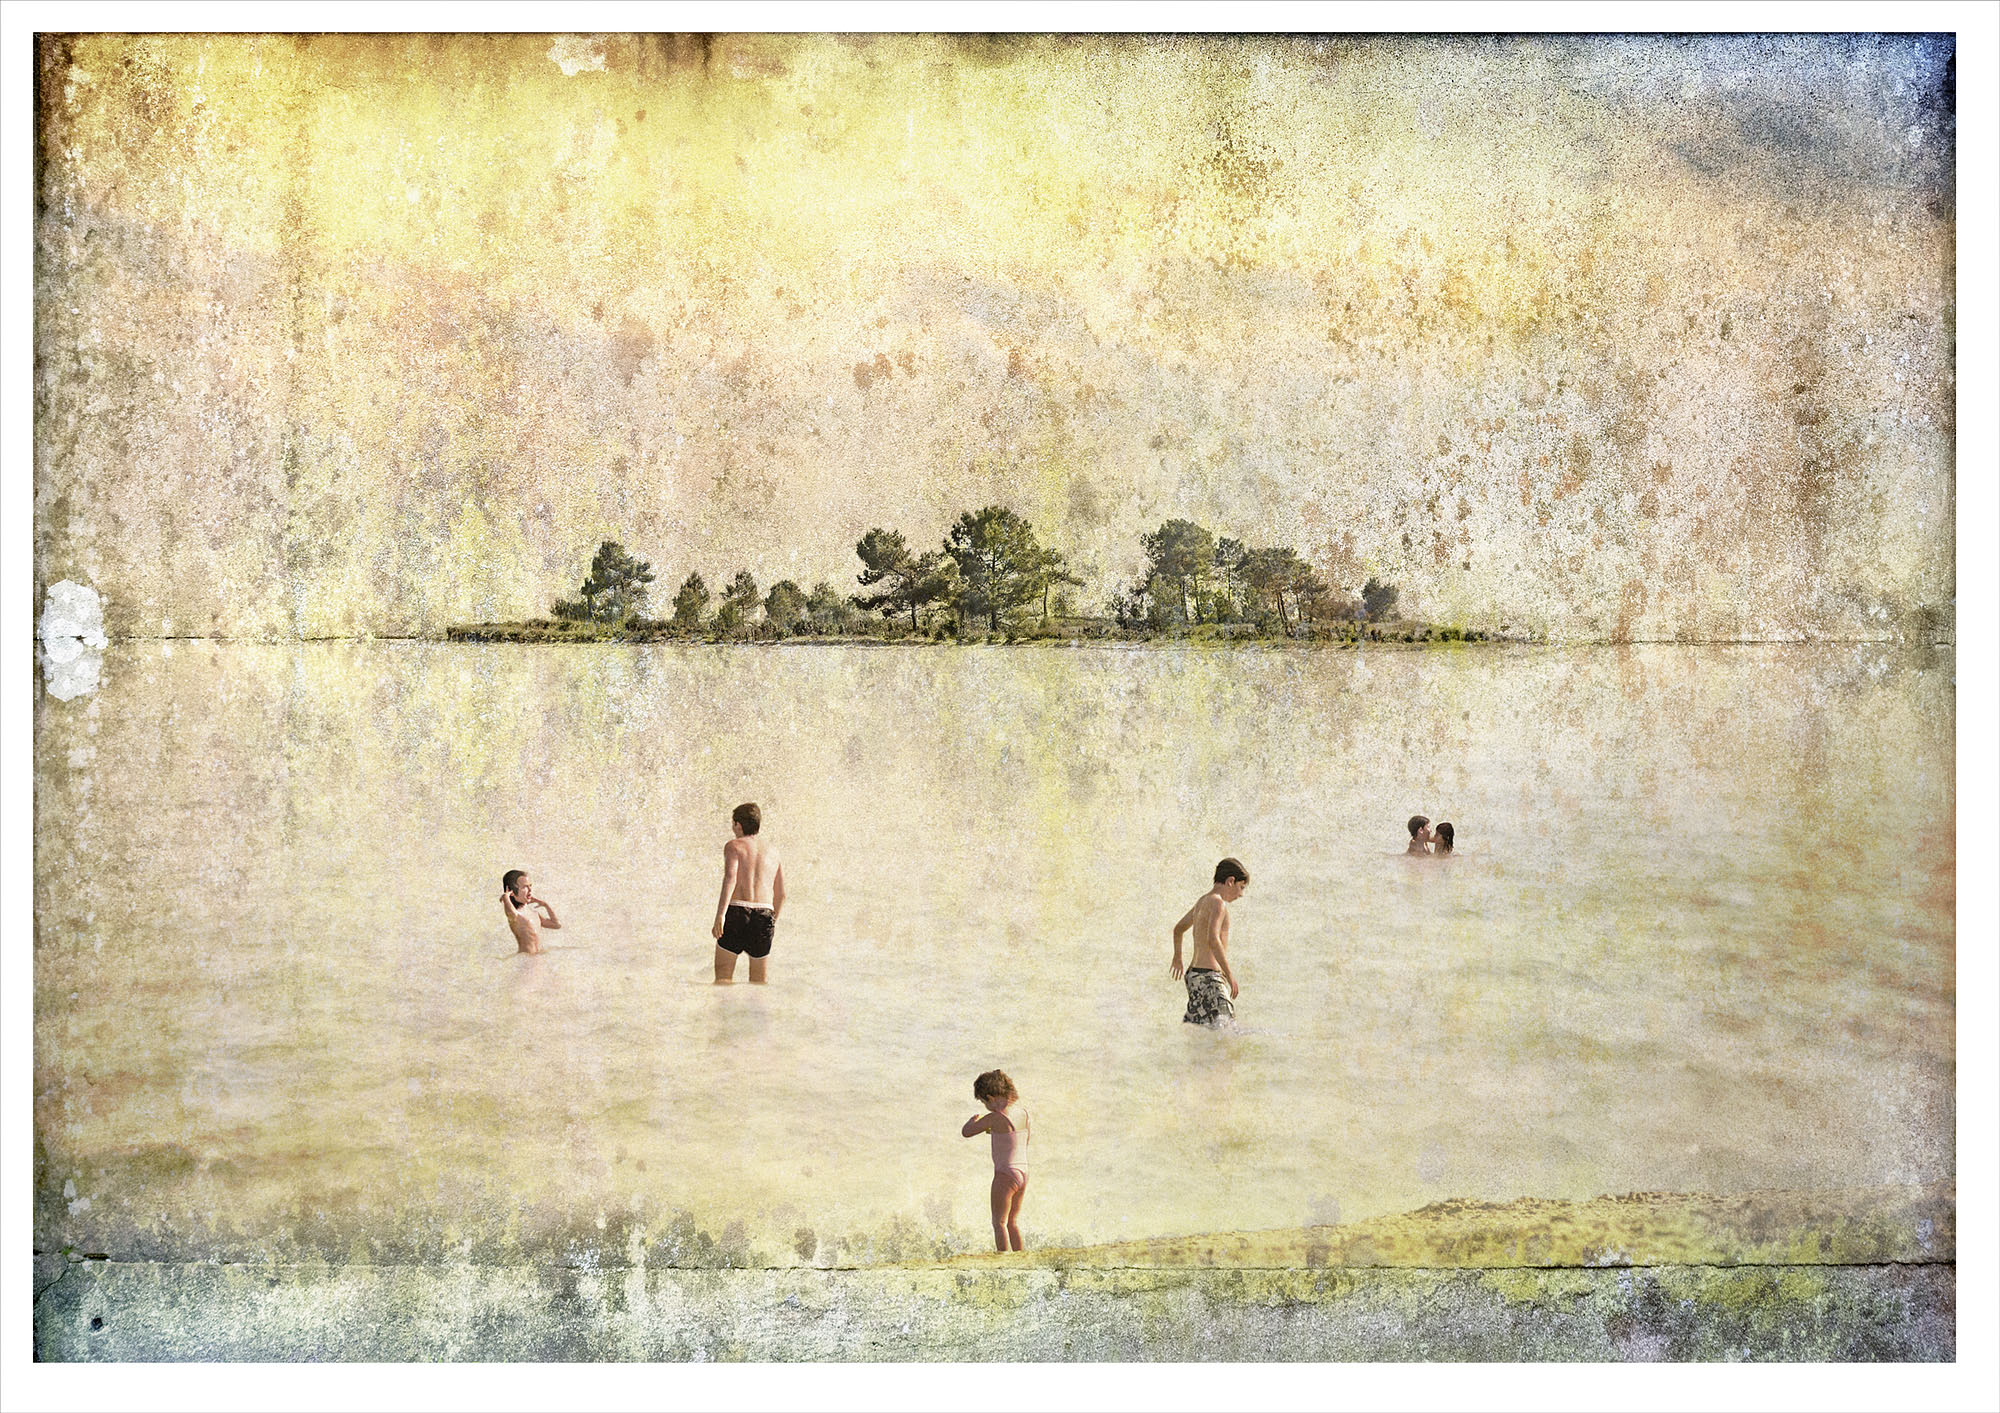 6 people in sea in a v formation. An island with trees ia cemtred on the horizon. The Whole image is textred and features warm tones